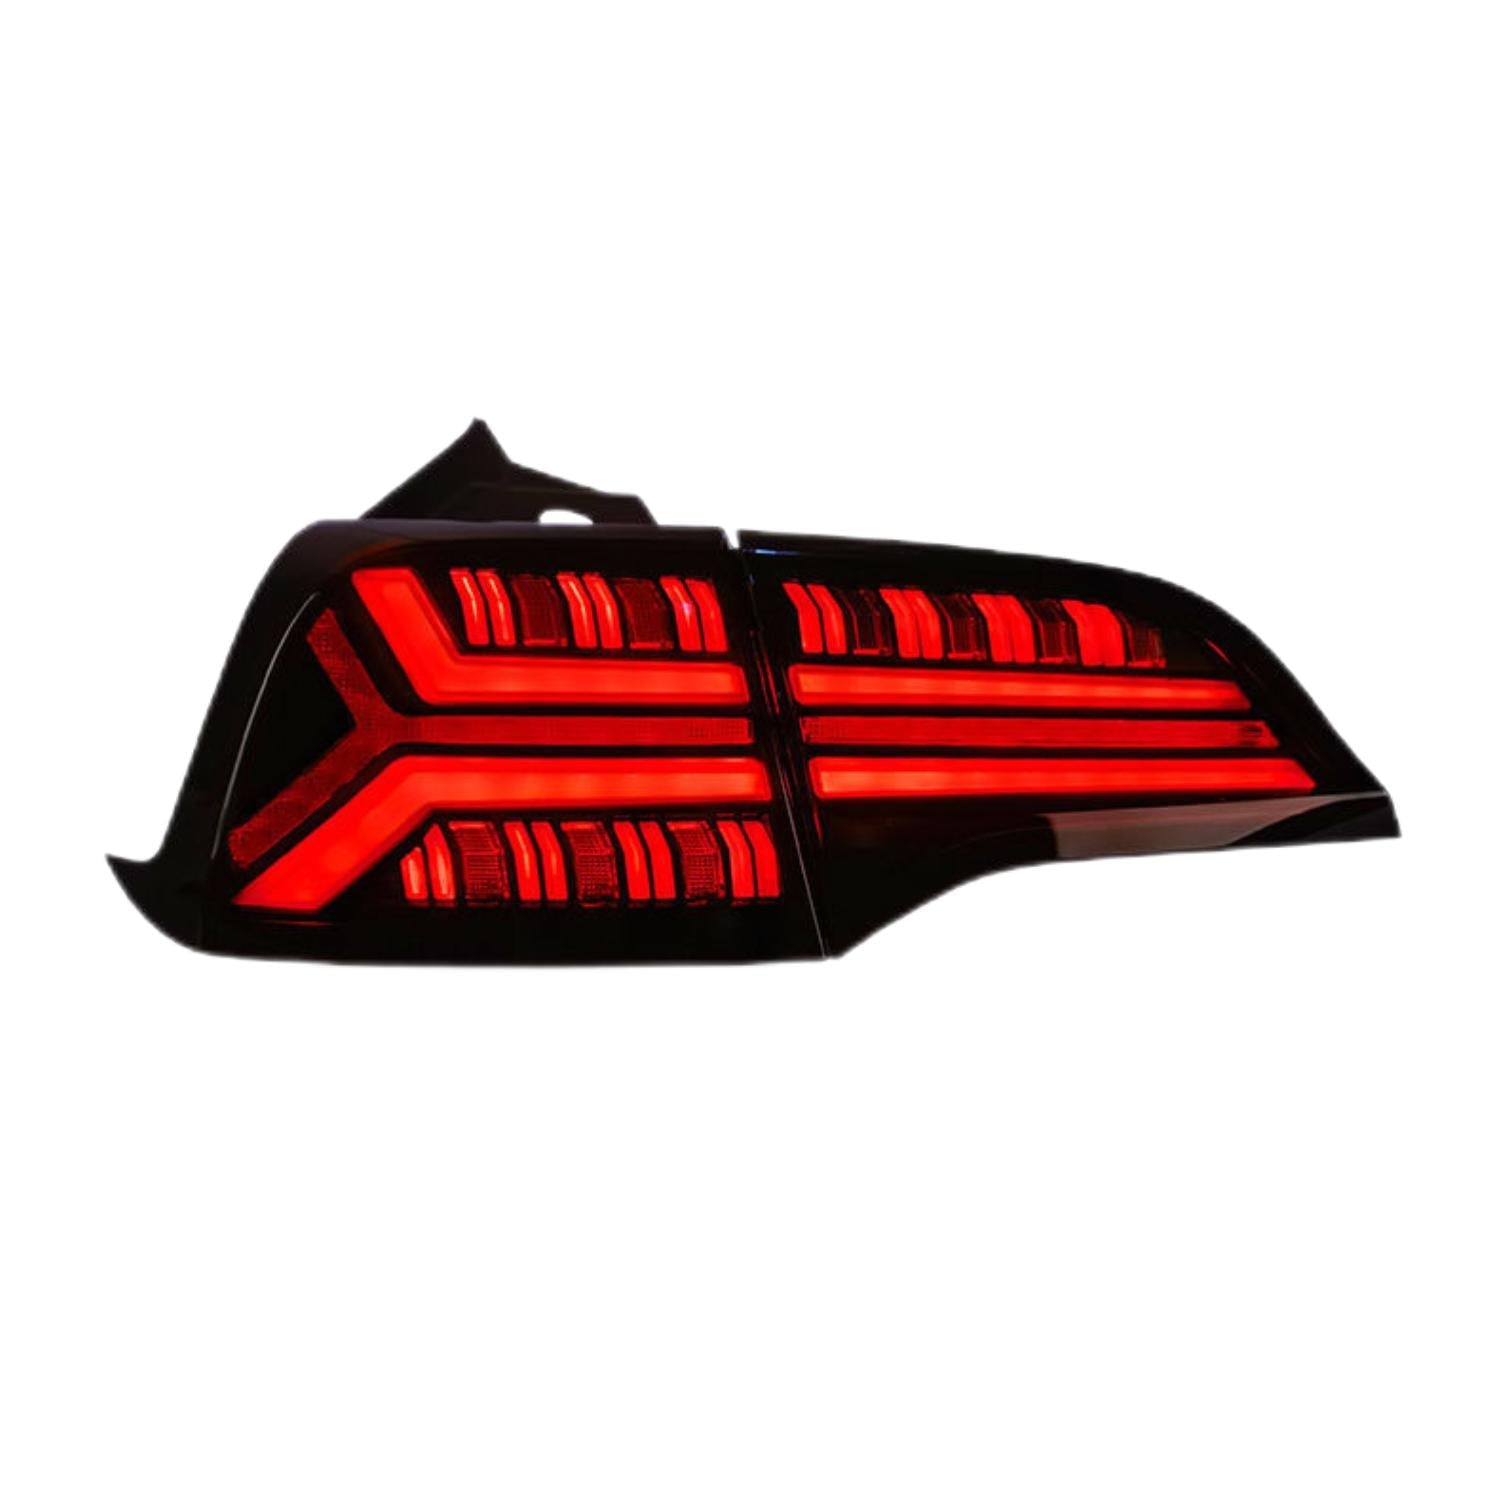 Fish Bone Tail Light For Tesla Model 3/Y - Tesery Official Store